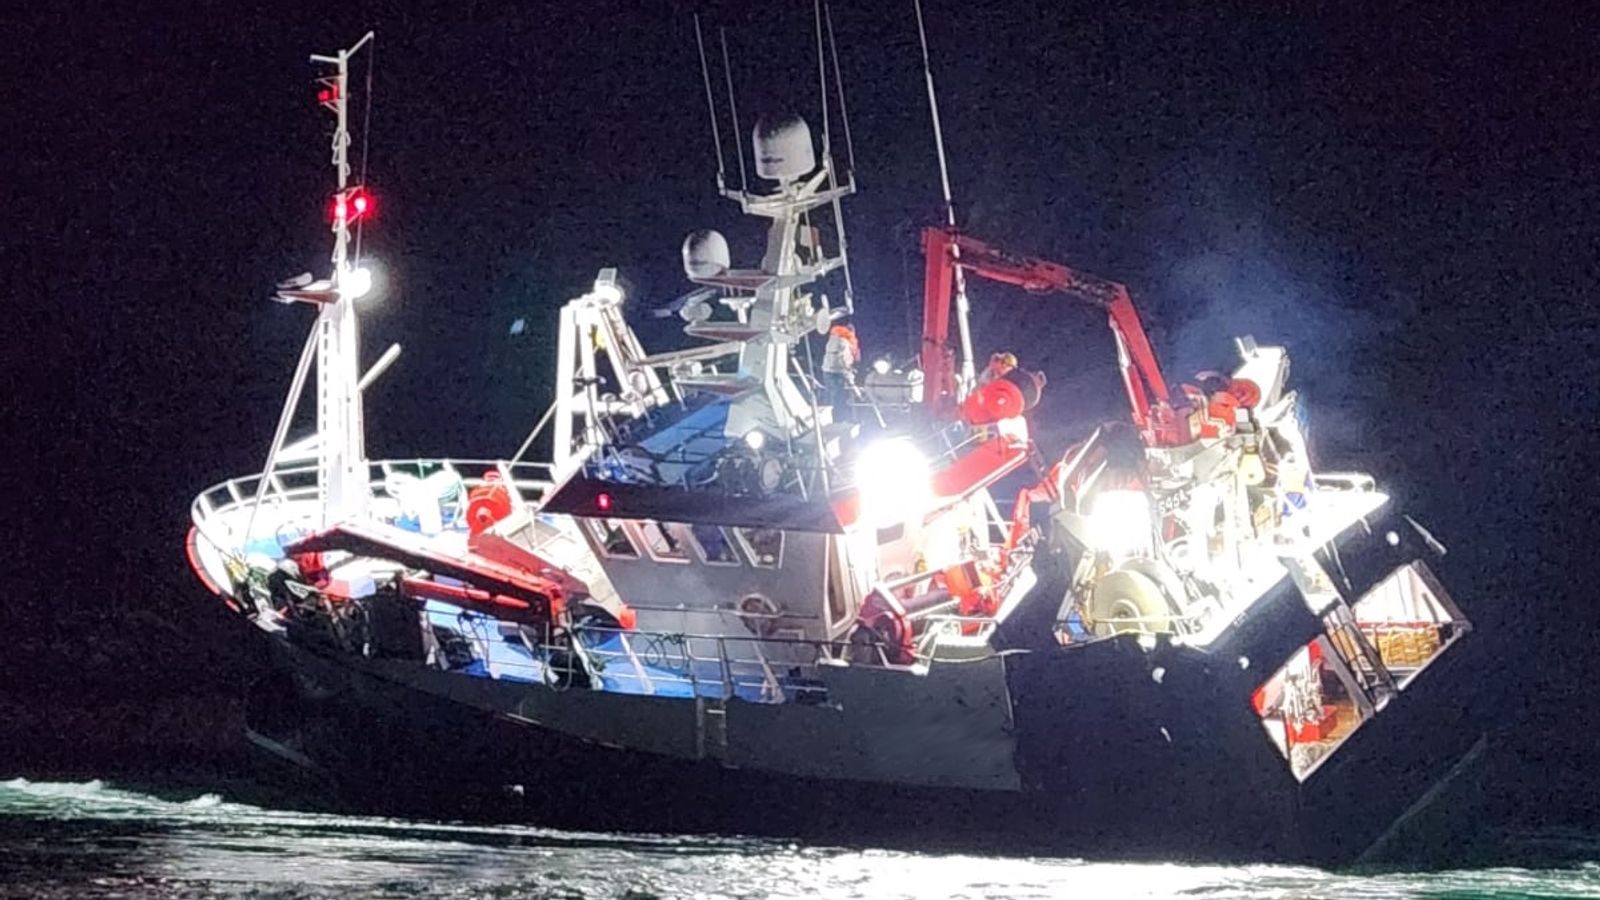 Skye trawler rescue: Tide threatened to topple 72ft fishing vessel